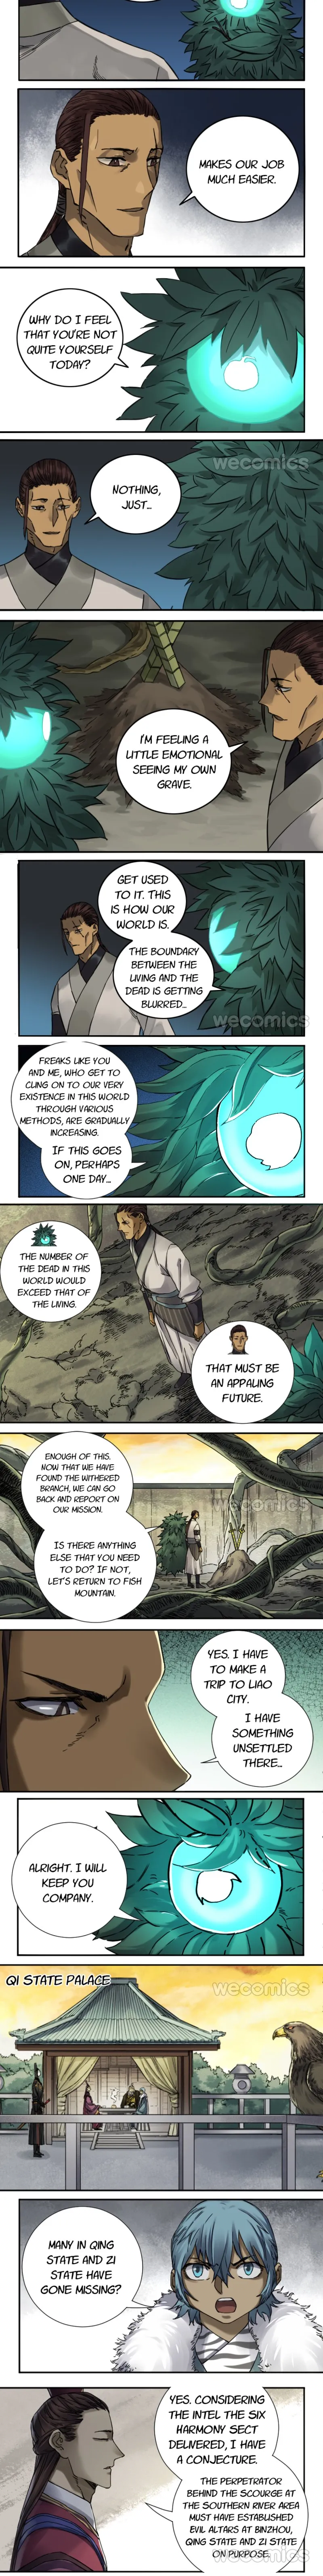 Martial Legacy - Page 2